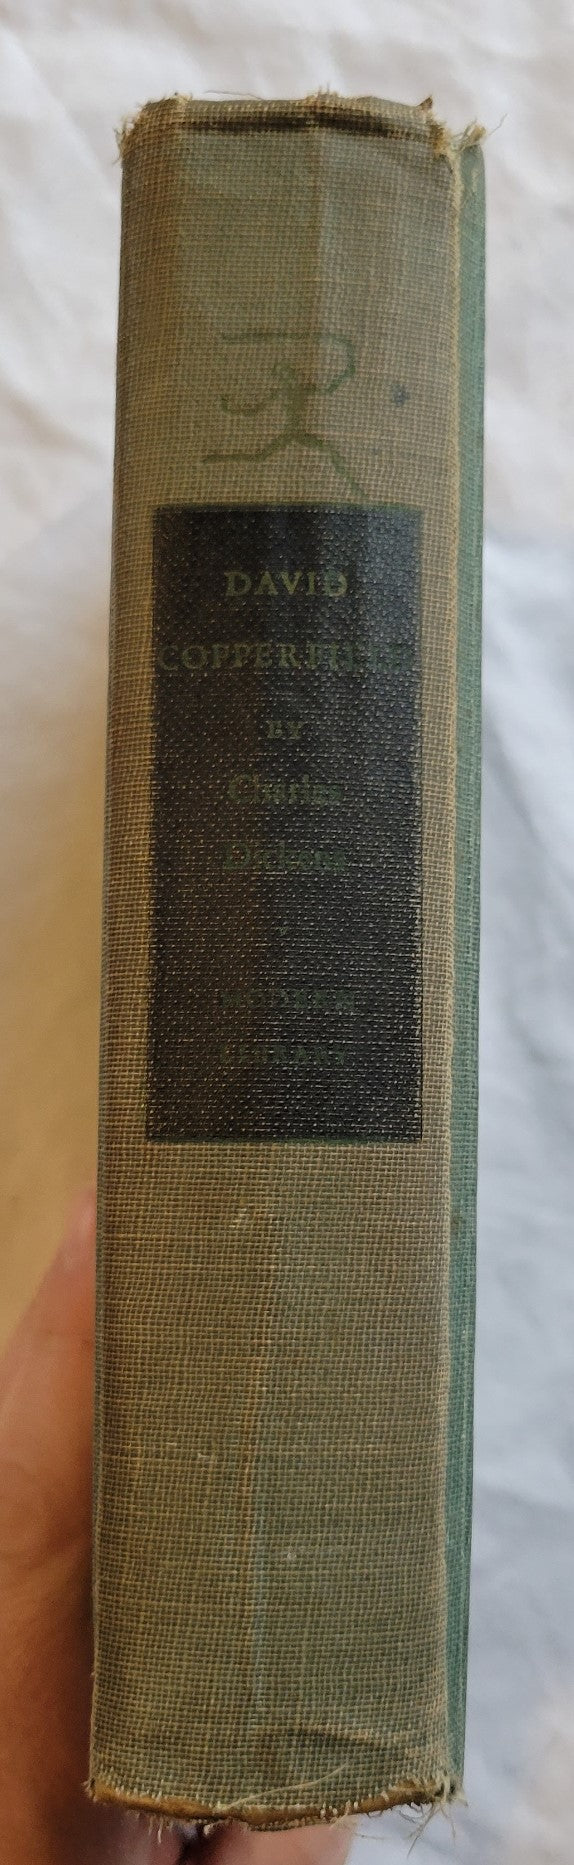 Vintage book "David Copperfield" by Charles Dickens, published by Random House, copyright 1950. View of spine.